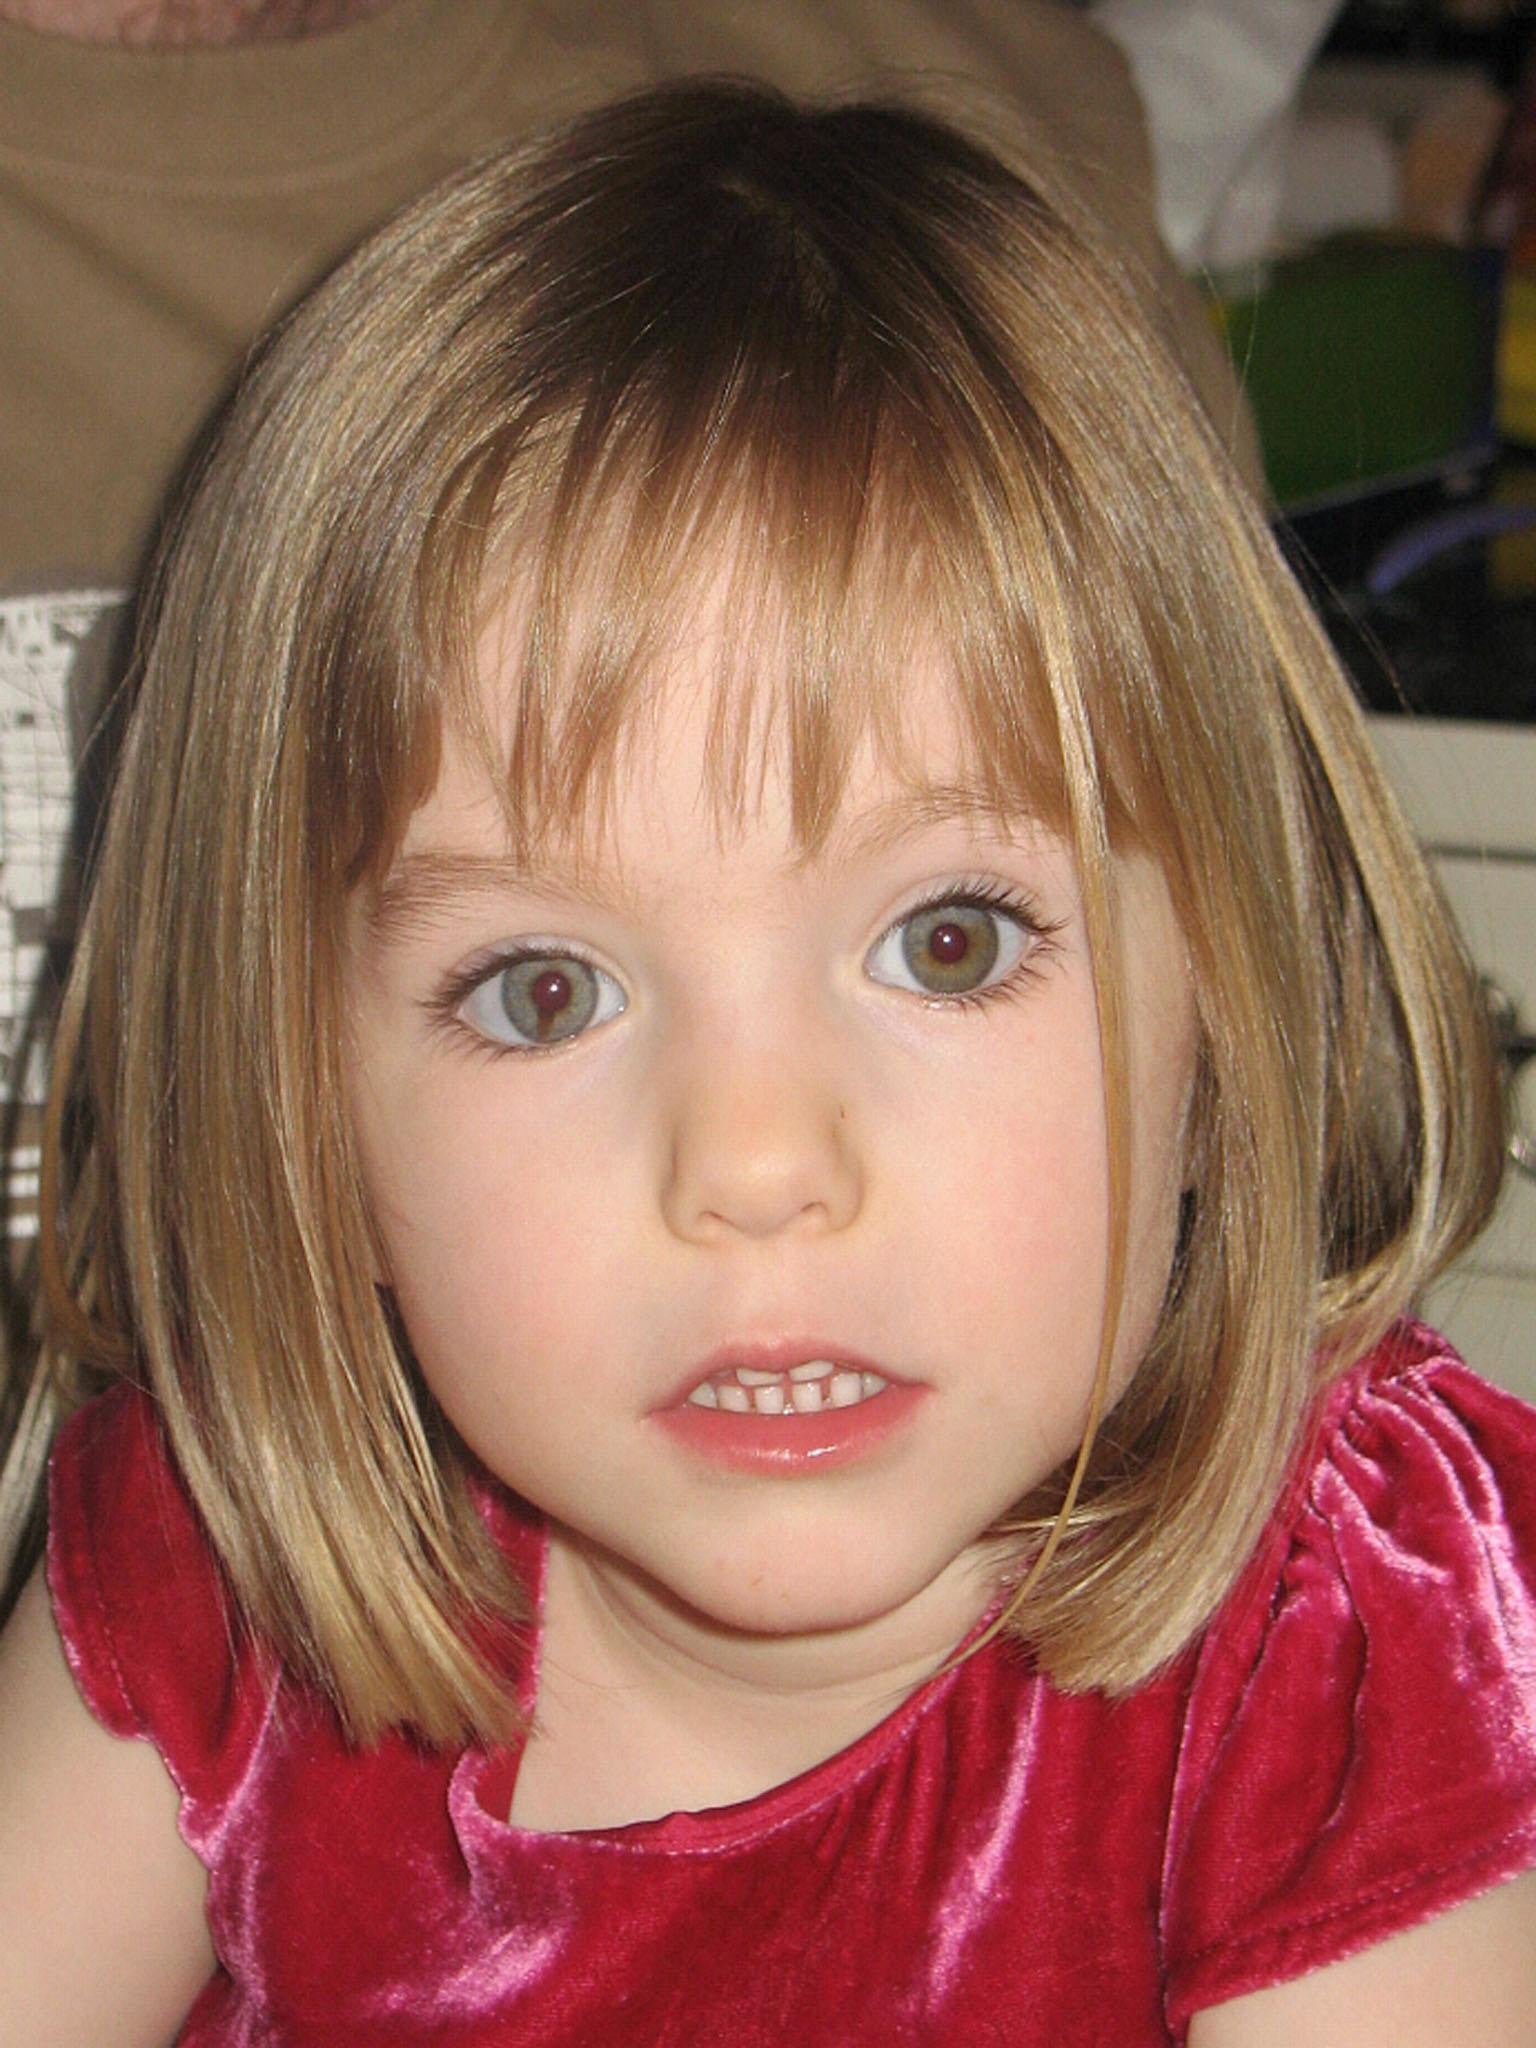 Madeleine McCann was three years old when she went missing from her family’s holiday apartment in the Praia da Luz resort on the Algarve, in Portugal, in May 2007